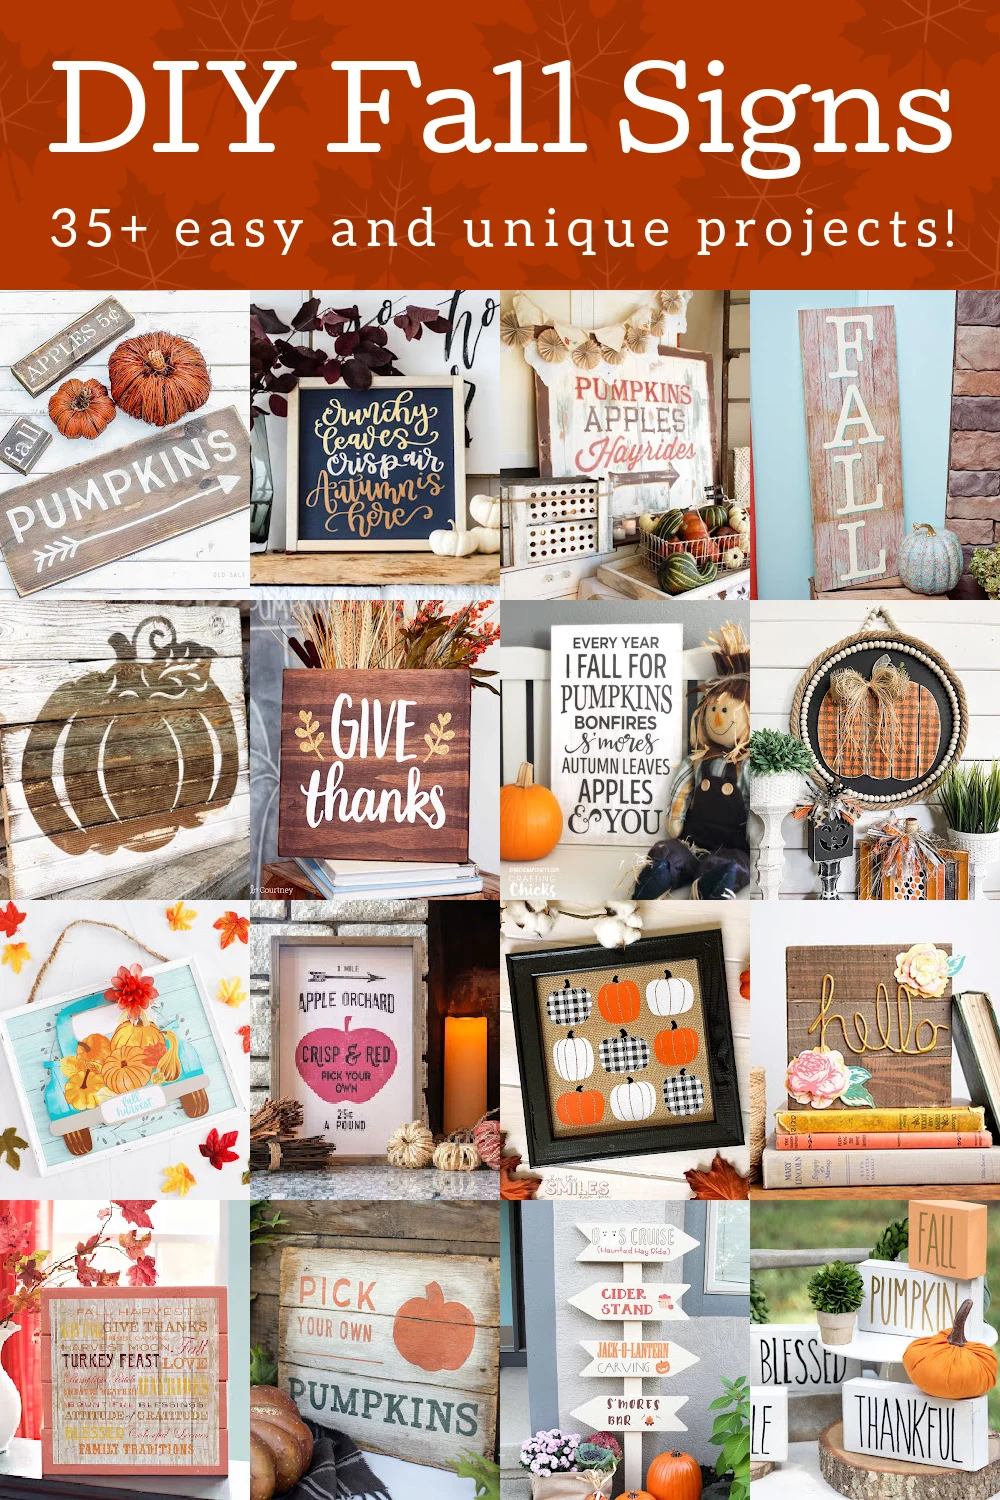 5 Decorate for fall in stages